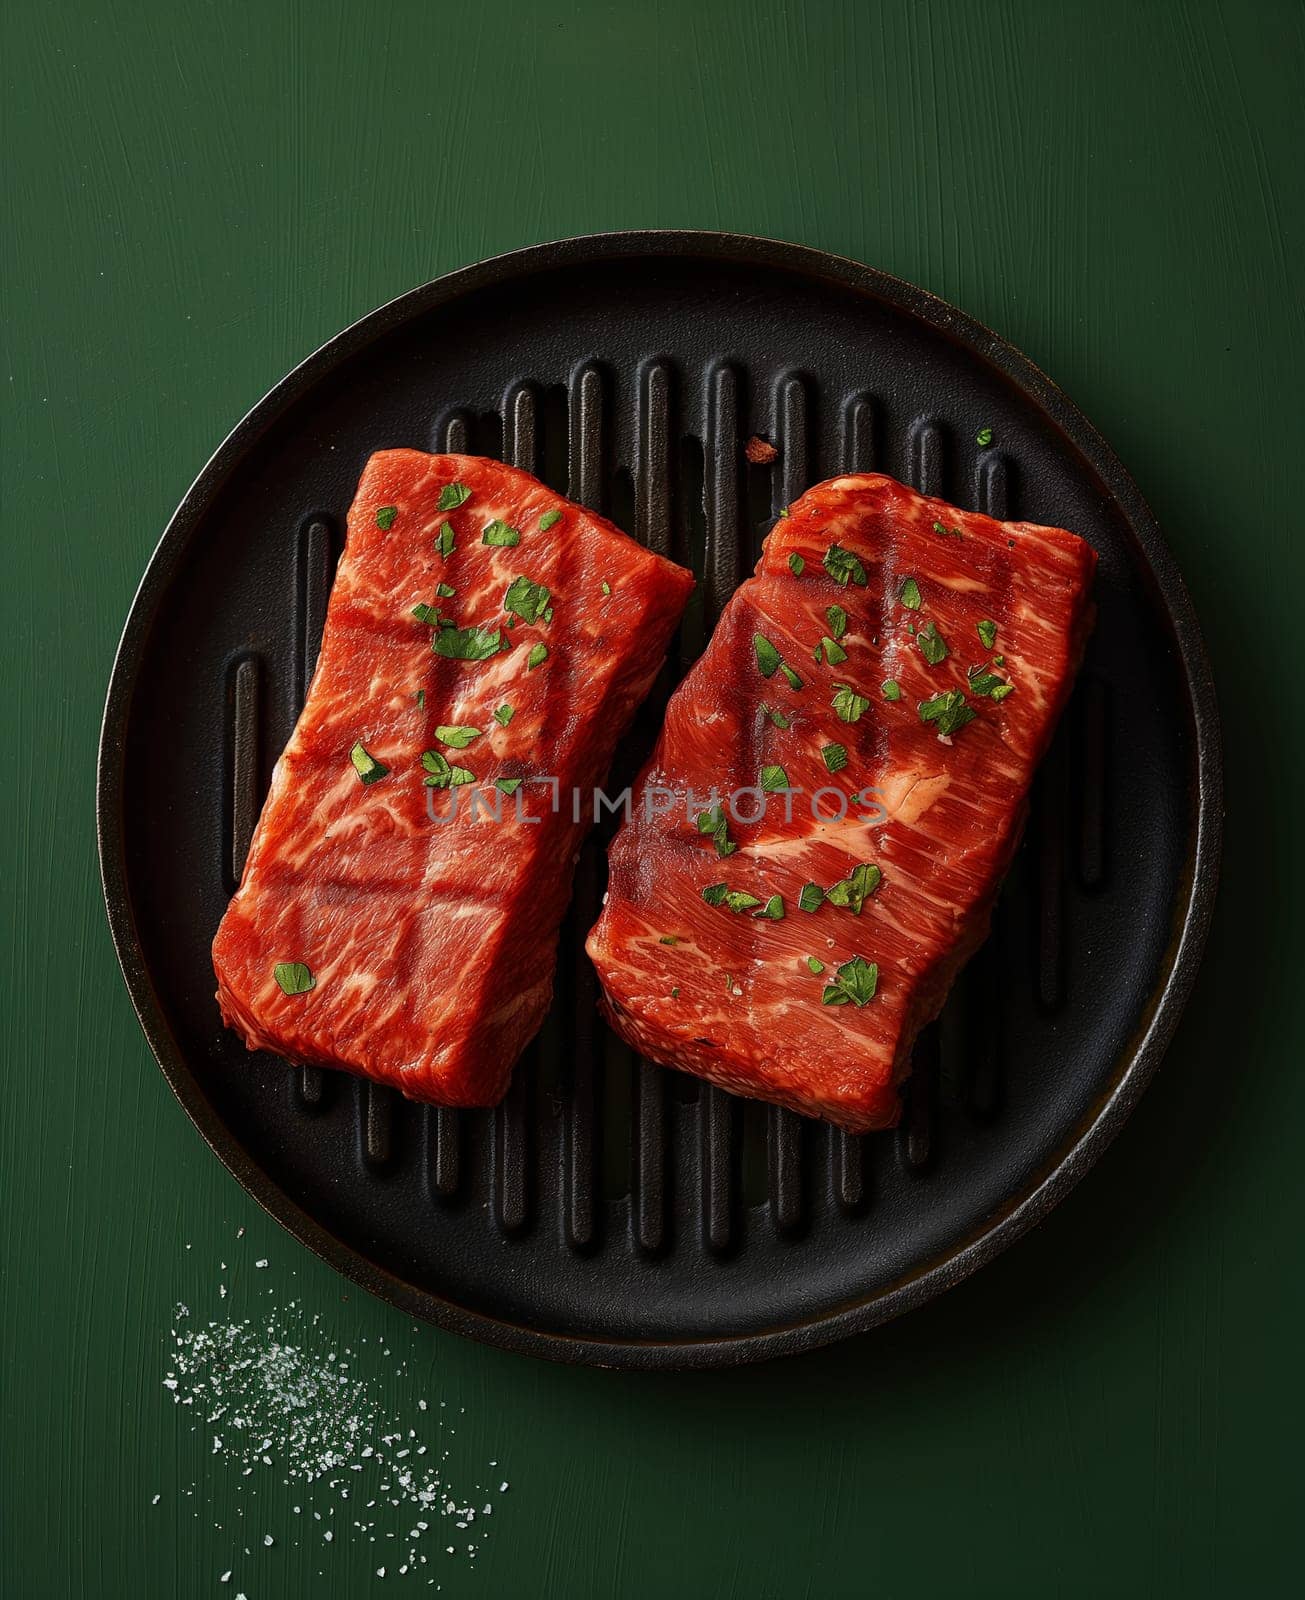 Two pieces of meat cooking on a grill. by Fischeron